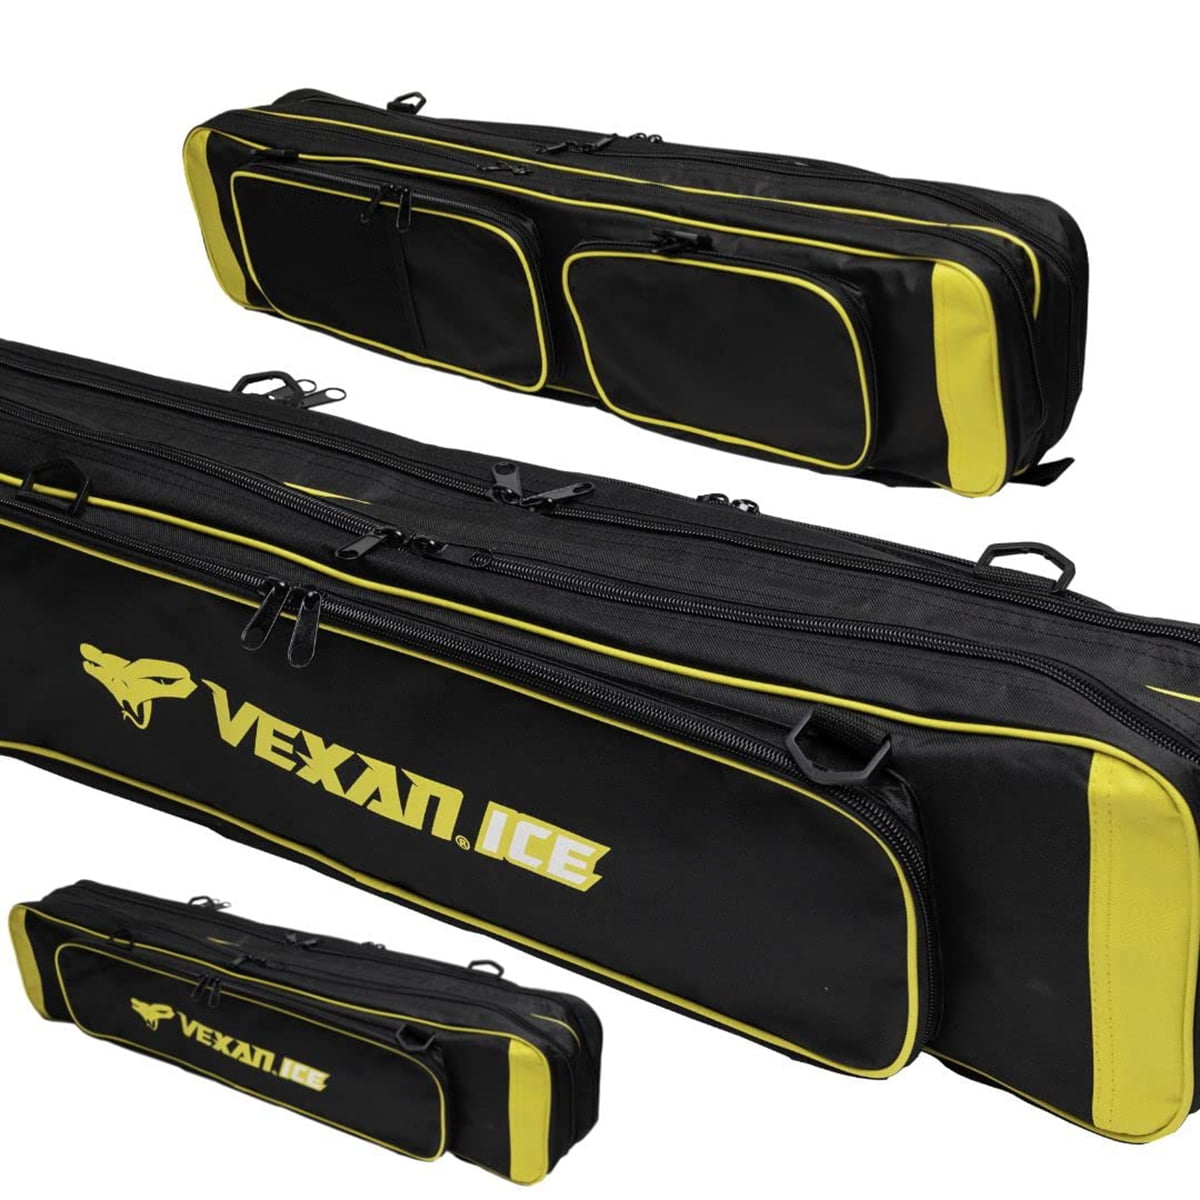 Vexan Ice Fishing Rod & Tackle Bag 36 Soft Case (Yellow)